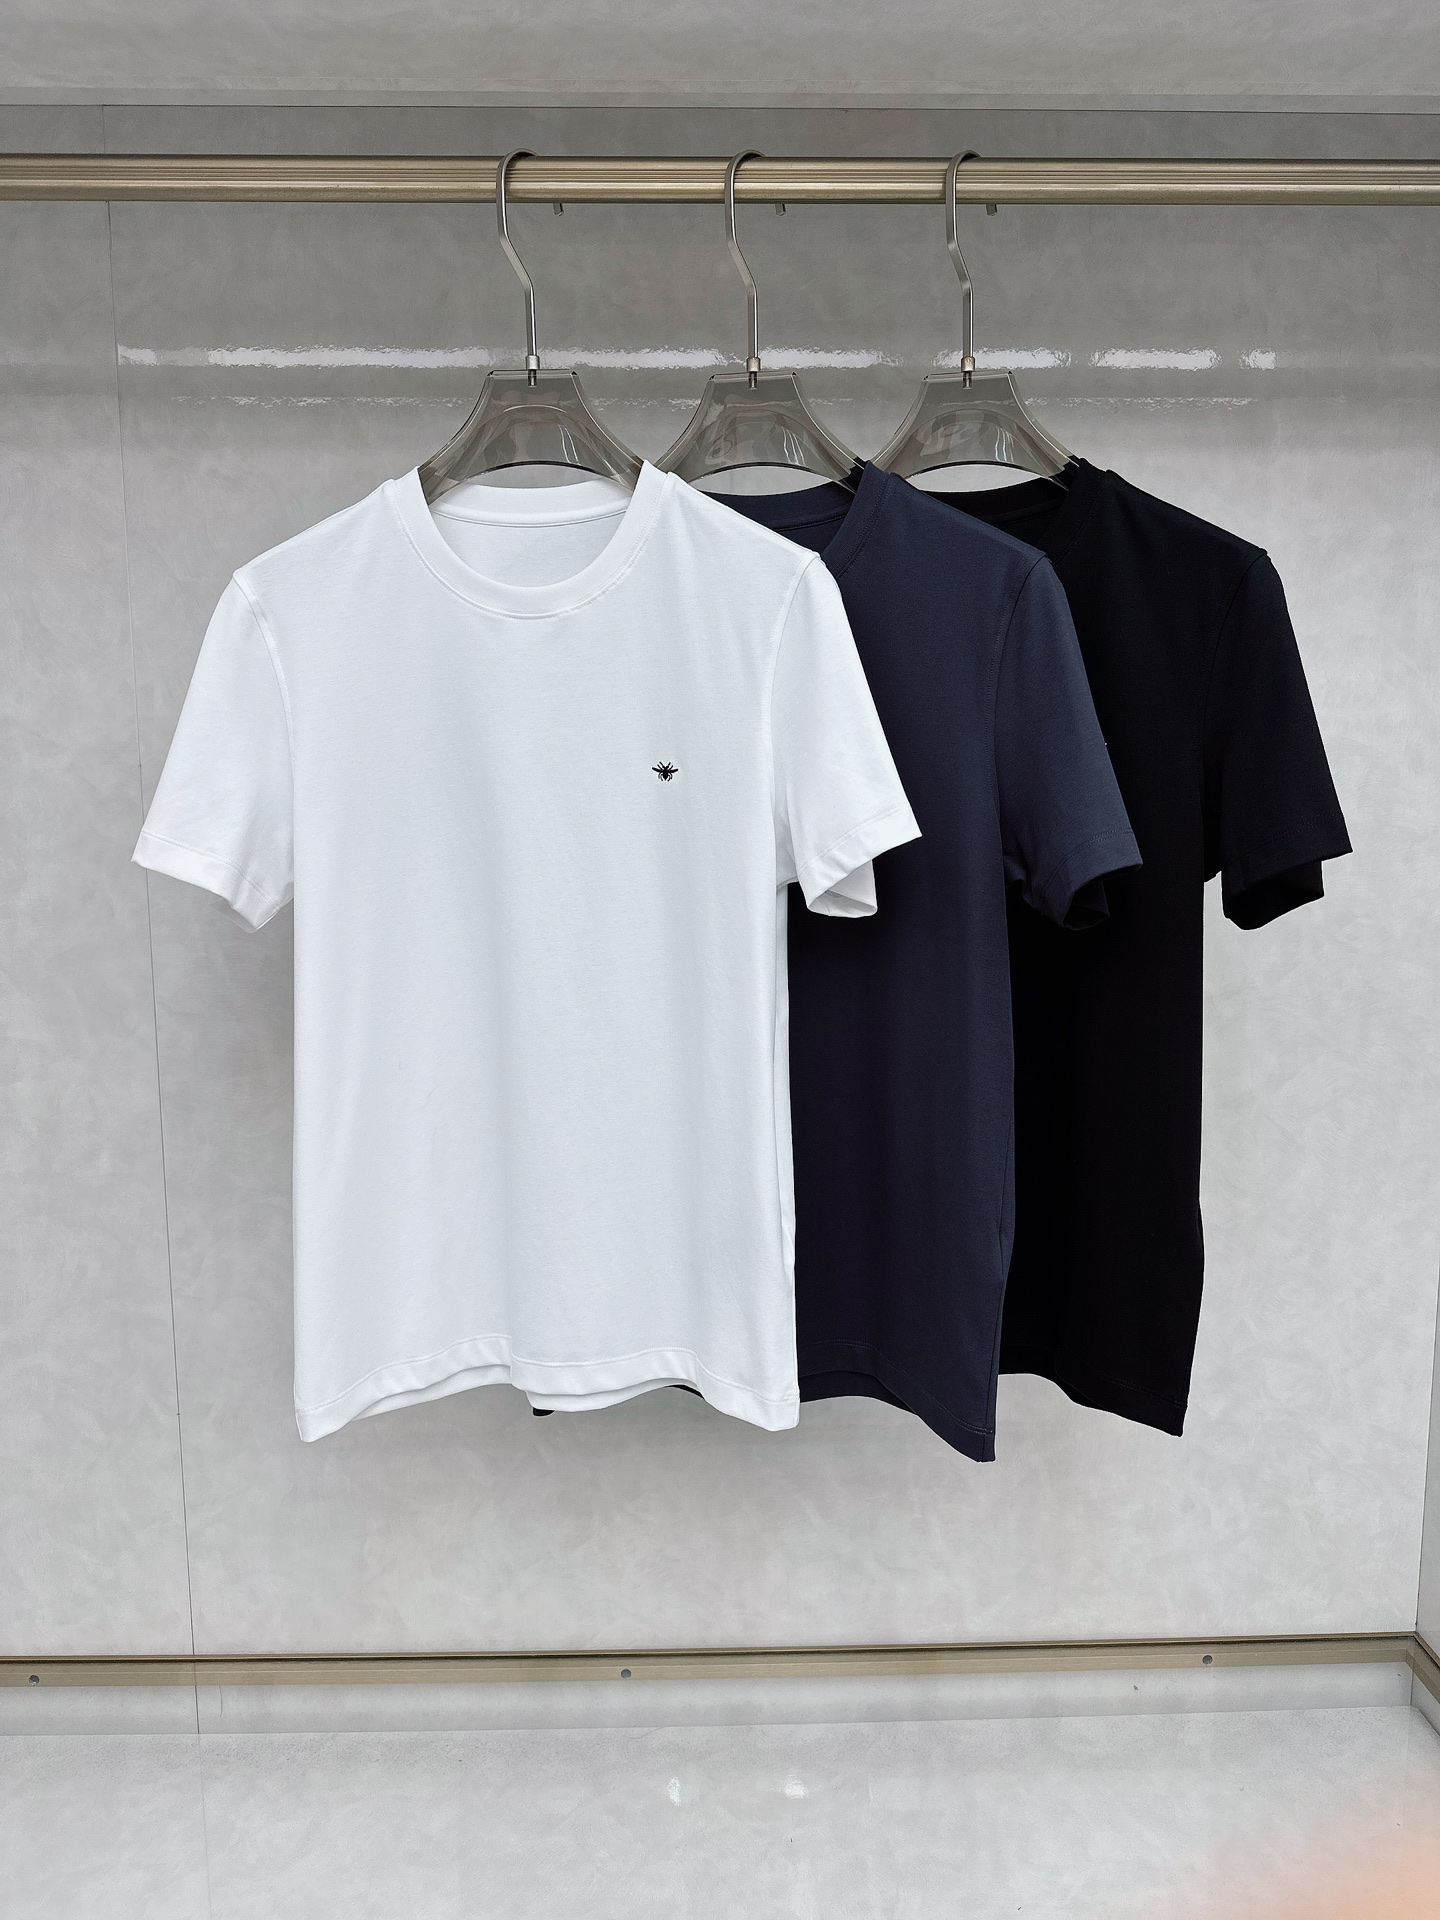 Dior Clothing T-Shirt AAA+ Replica
 Spring/Summer Collection Short Sleeve